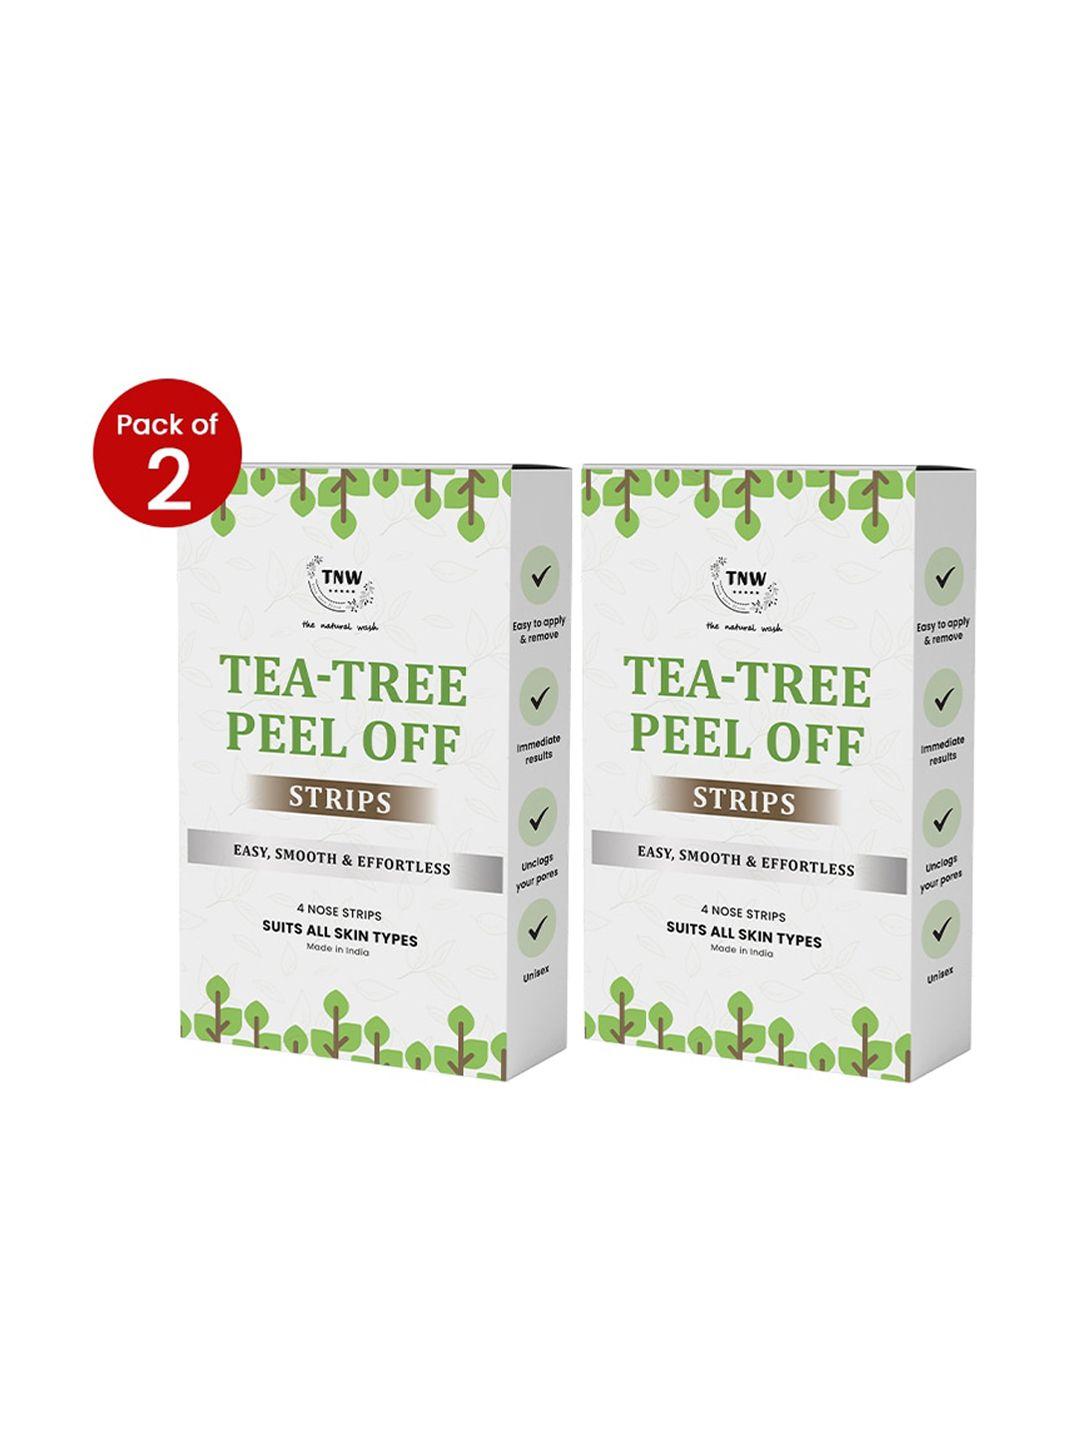 tnw the natural wash set of 2 tea tree peel off nose strips - 4 strips each